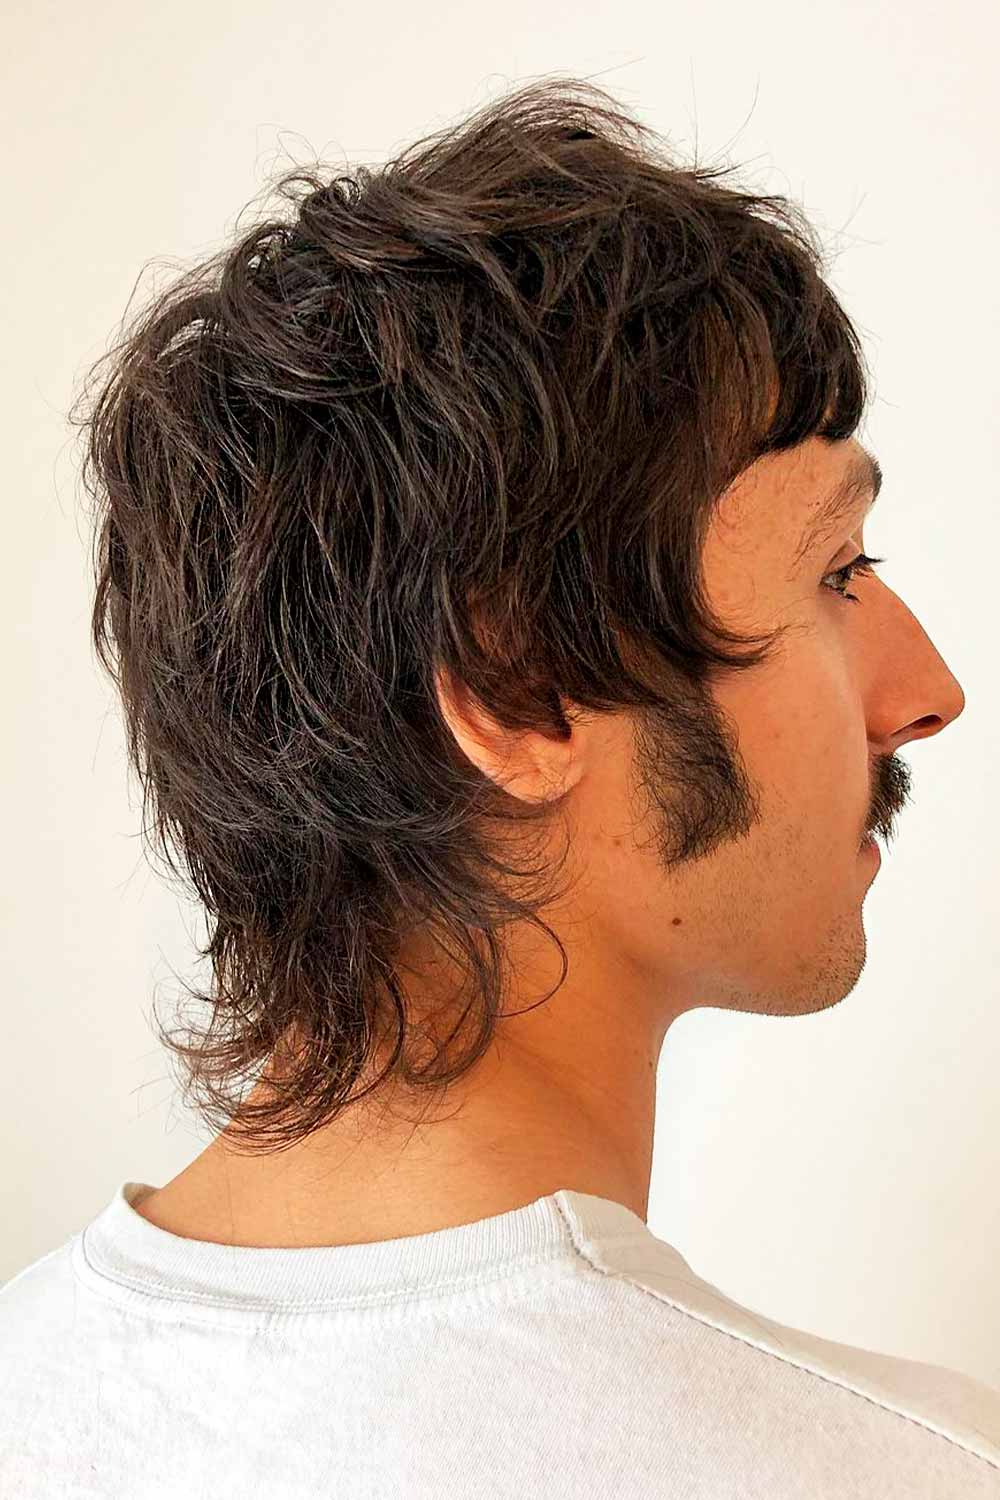 Short And Layered Wolf Mullet Men #wolfcutmen #wolfhairstylemen #wolfhaircut